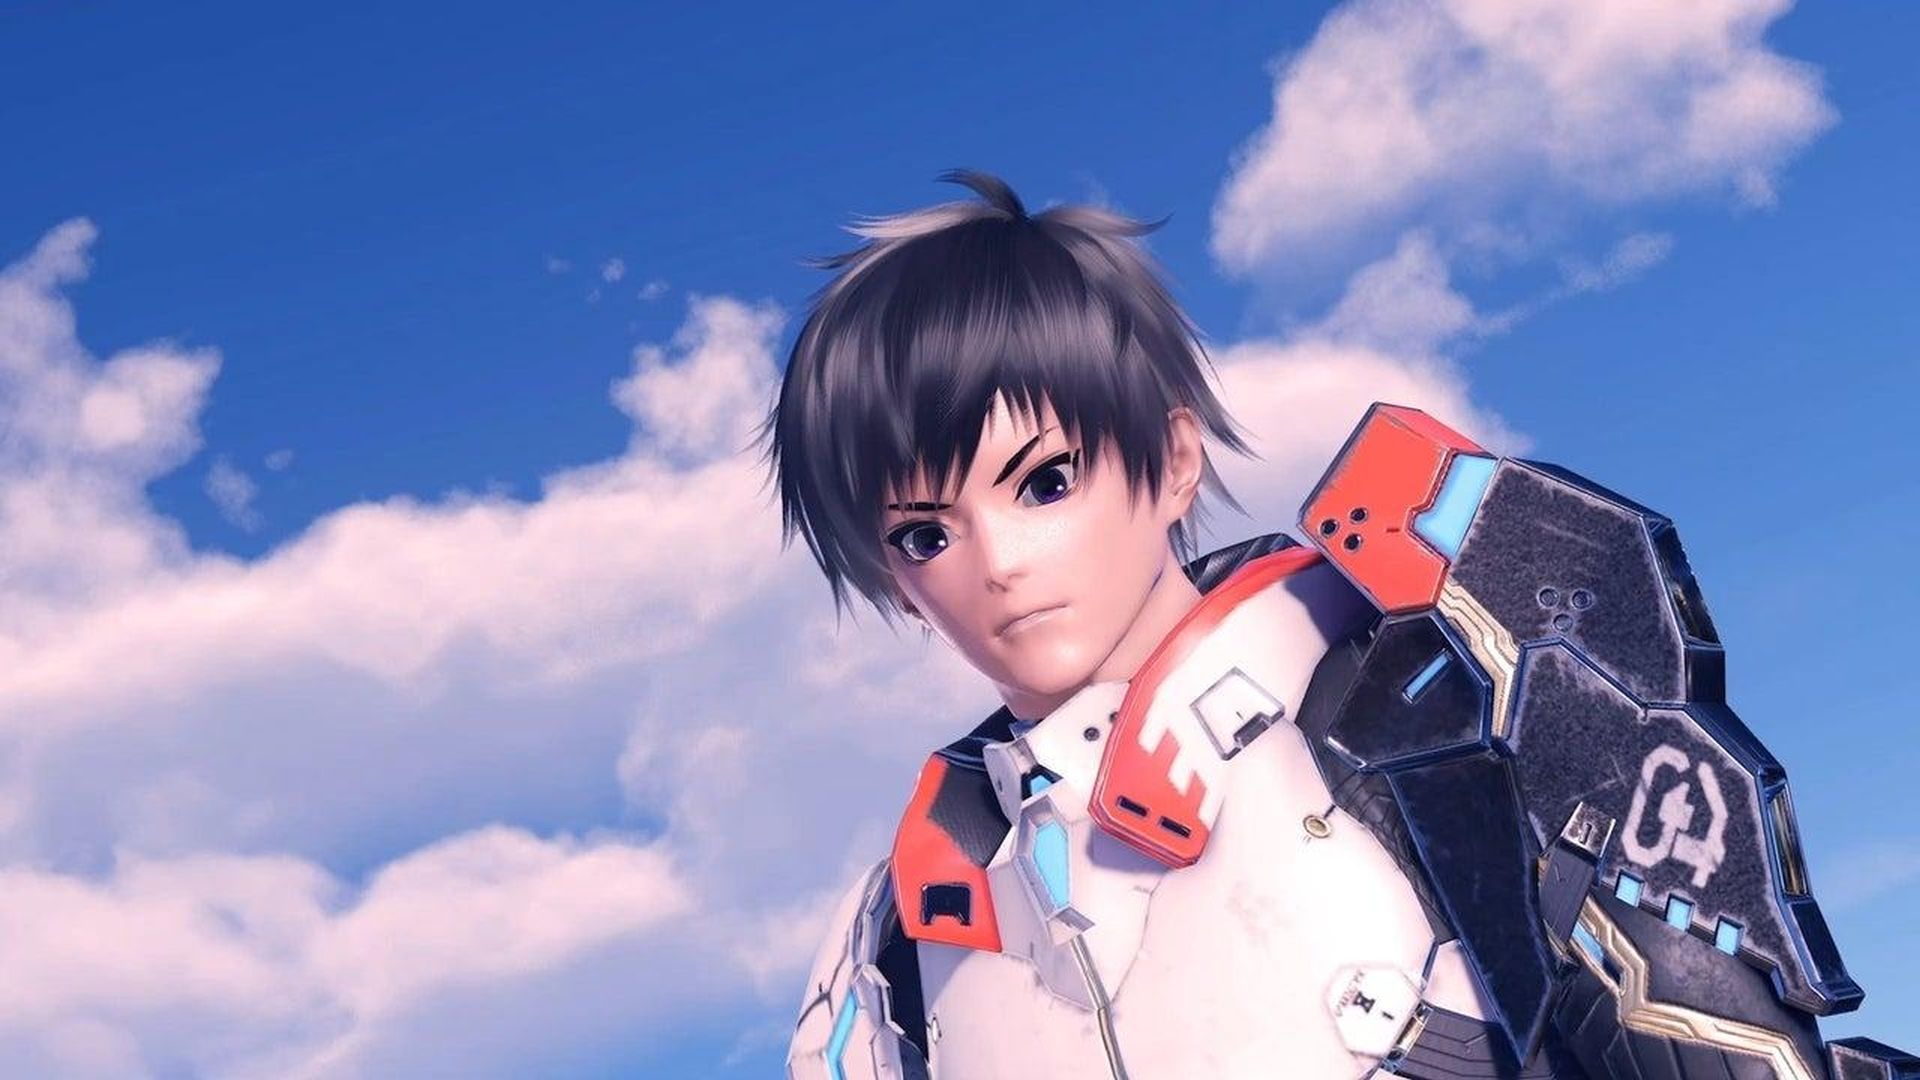 Phantasy Star Online 2: New Genesis Will Co Exist With Current Game